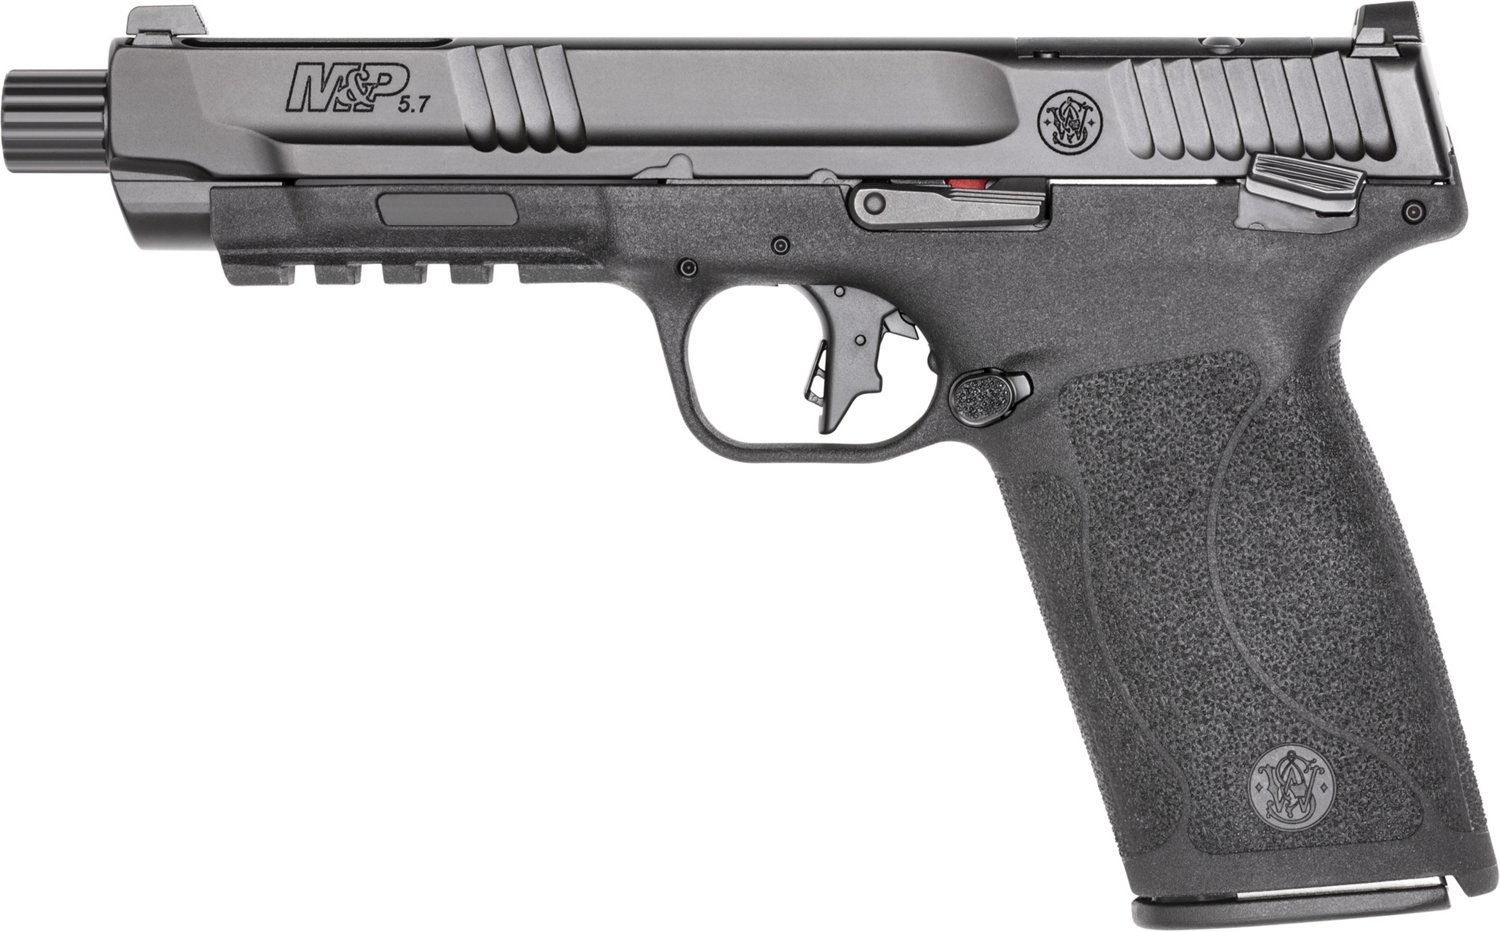 Smith & Wesson M&P 5.7x28mm Pistol                                                                                               - view number 2